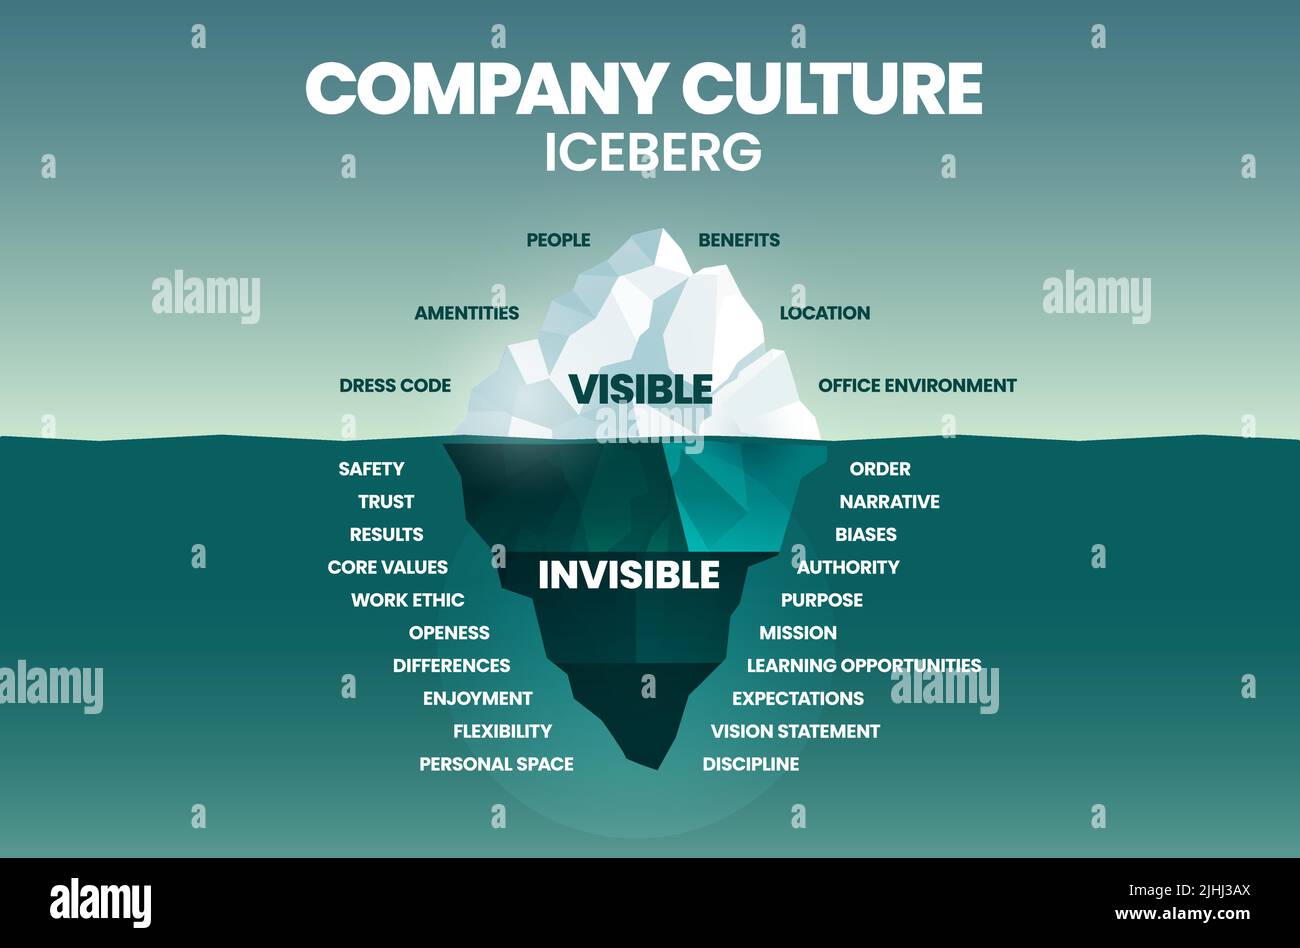 The Company Culture iceberg model allows you to measure your ...